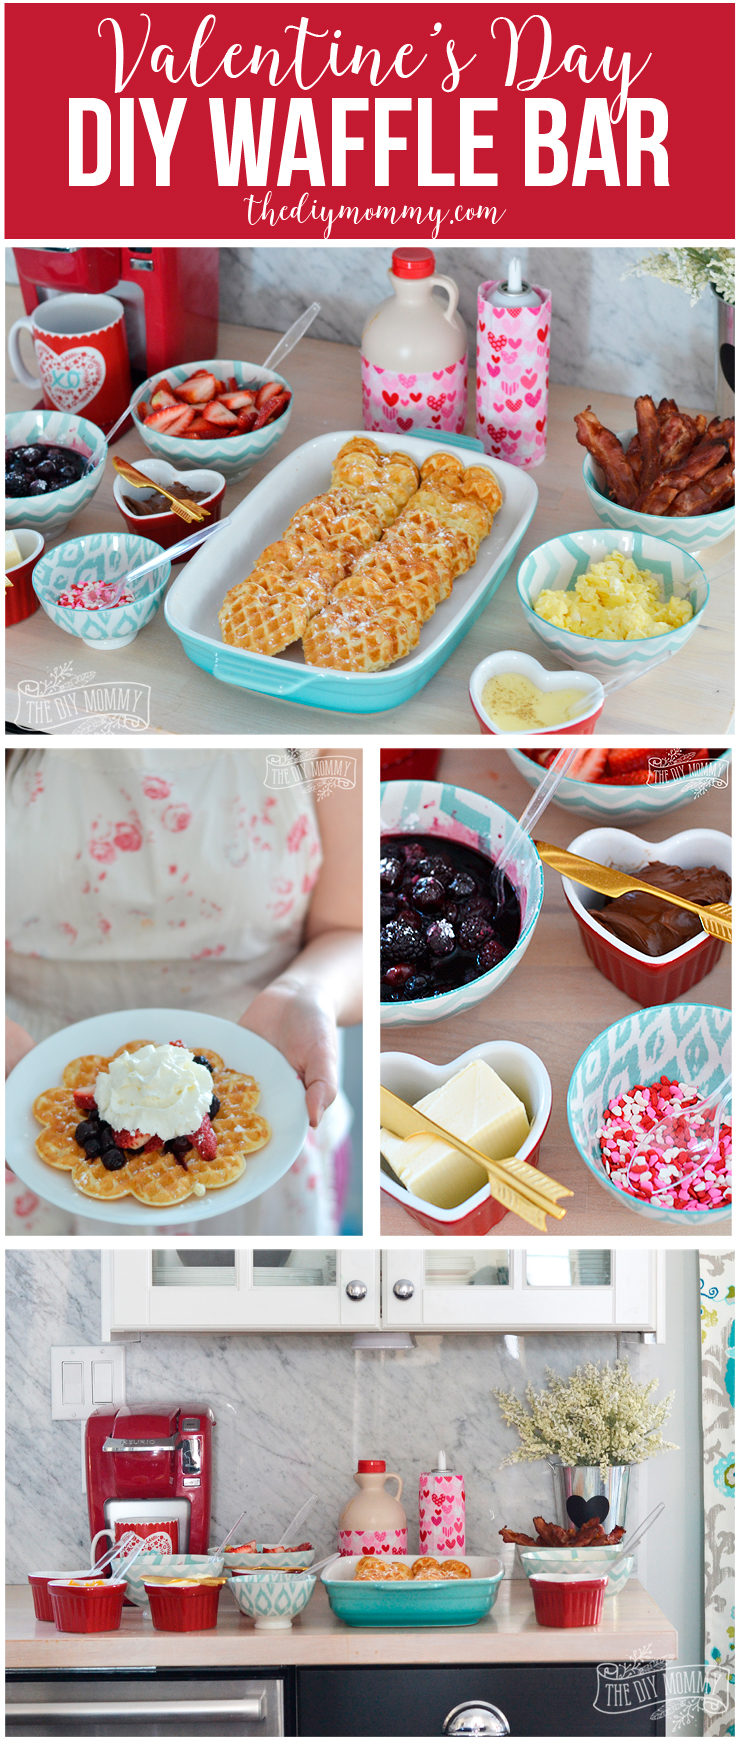 Valentine's Day Waffle Bar - it's such a sweet idea! Make heart shaped waffles and serve with a variety of sweet and savory toppings.